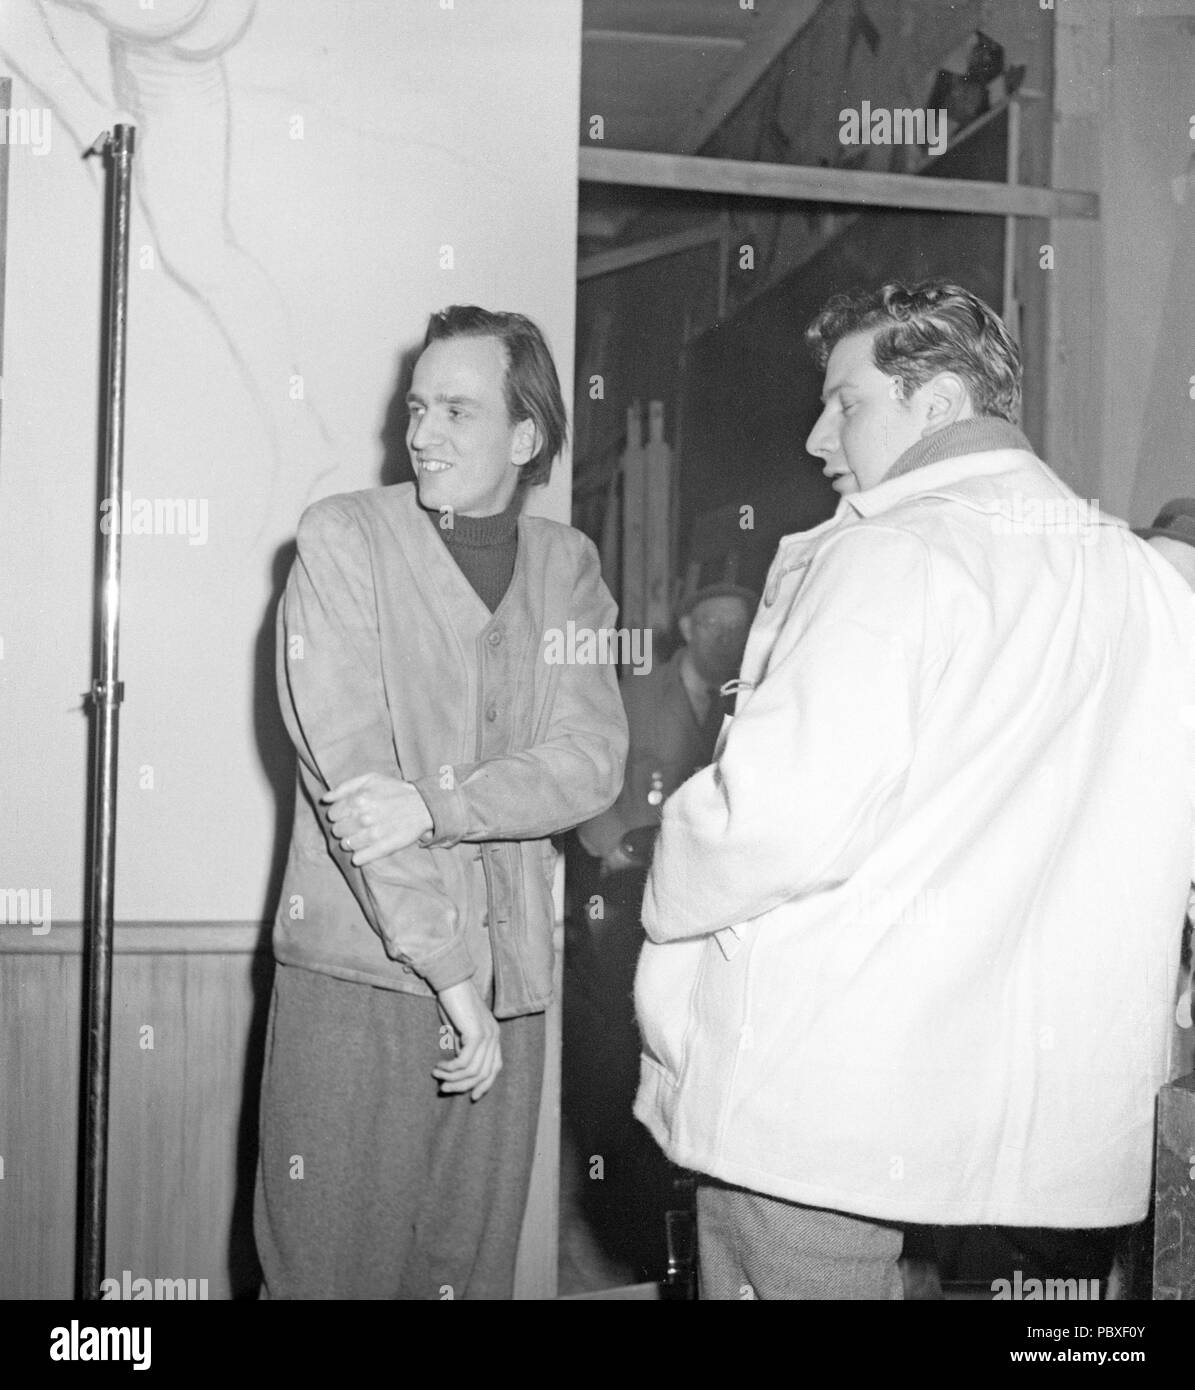 Ingmar Bergman. 1918-2007.  Swedish film director. Pictured here 1948 with actor Peter Ustinov, born april 16 1921 - dead march 28 2004, who made a stage adaption of Bergman's Frenzy and played the leading part as Caligula on St. Martin's Theatre in London this year. Photographer: Kristoffersson/AF43-2 Stock Photo